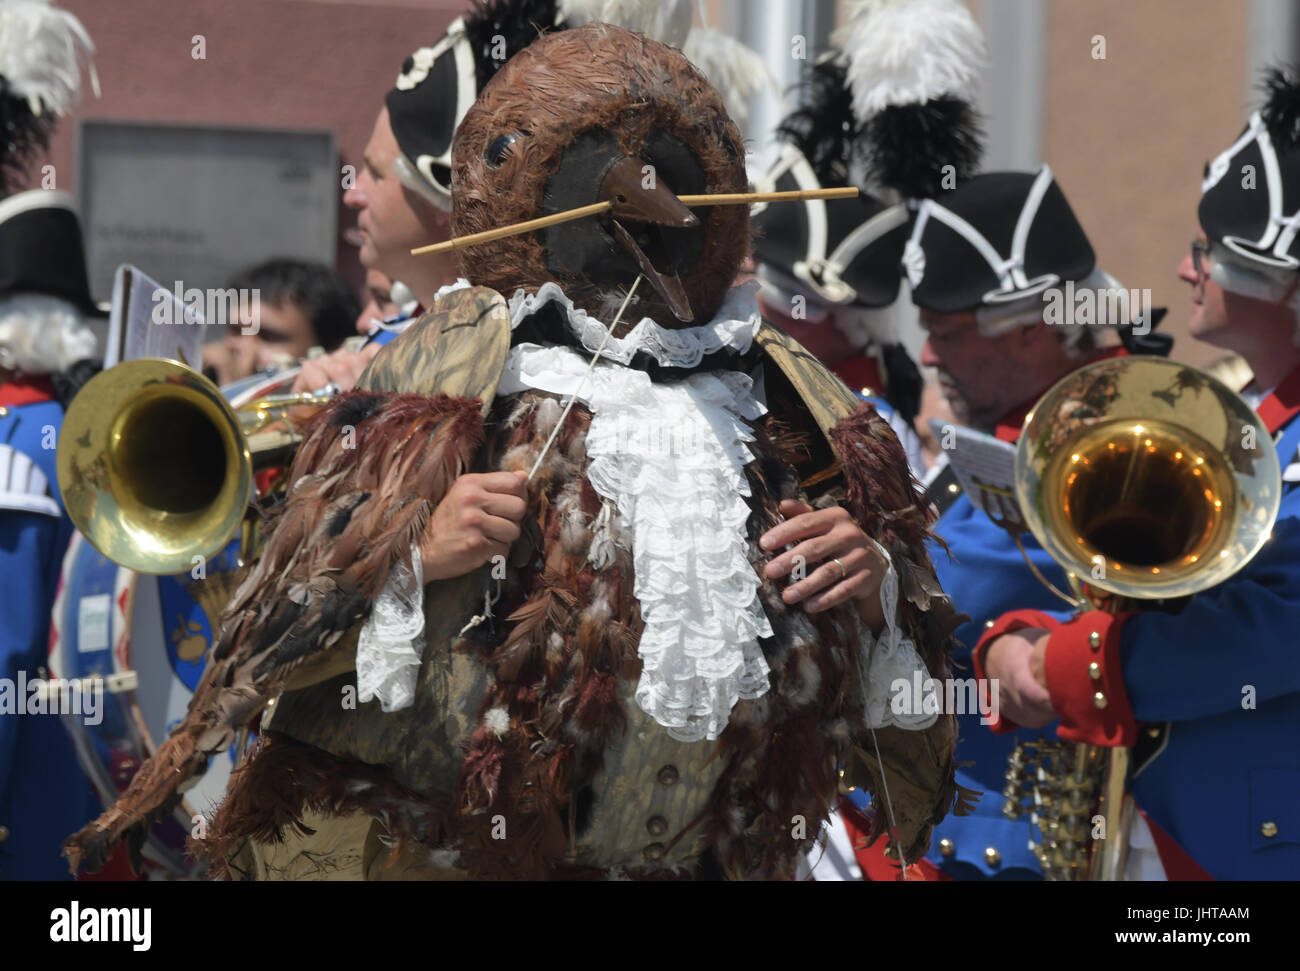 Ulm, Germany. 16th July, 2017. The Sparrow of Ulm can be seen during the Fisher's dance in Ulm, Germany, 16 July 2017. Every four years the water jousting festival takes place in Ulm - costumed participants try their best to tip each other into the Danube river with lances. Photo: Stefan Puchner/dpa/Alamy Live News Stock Photo